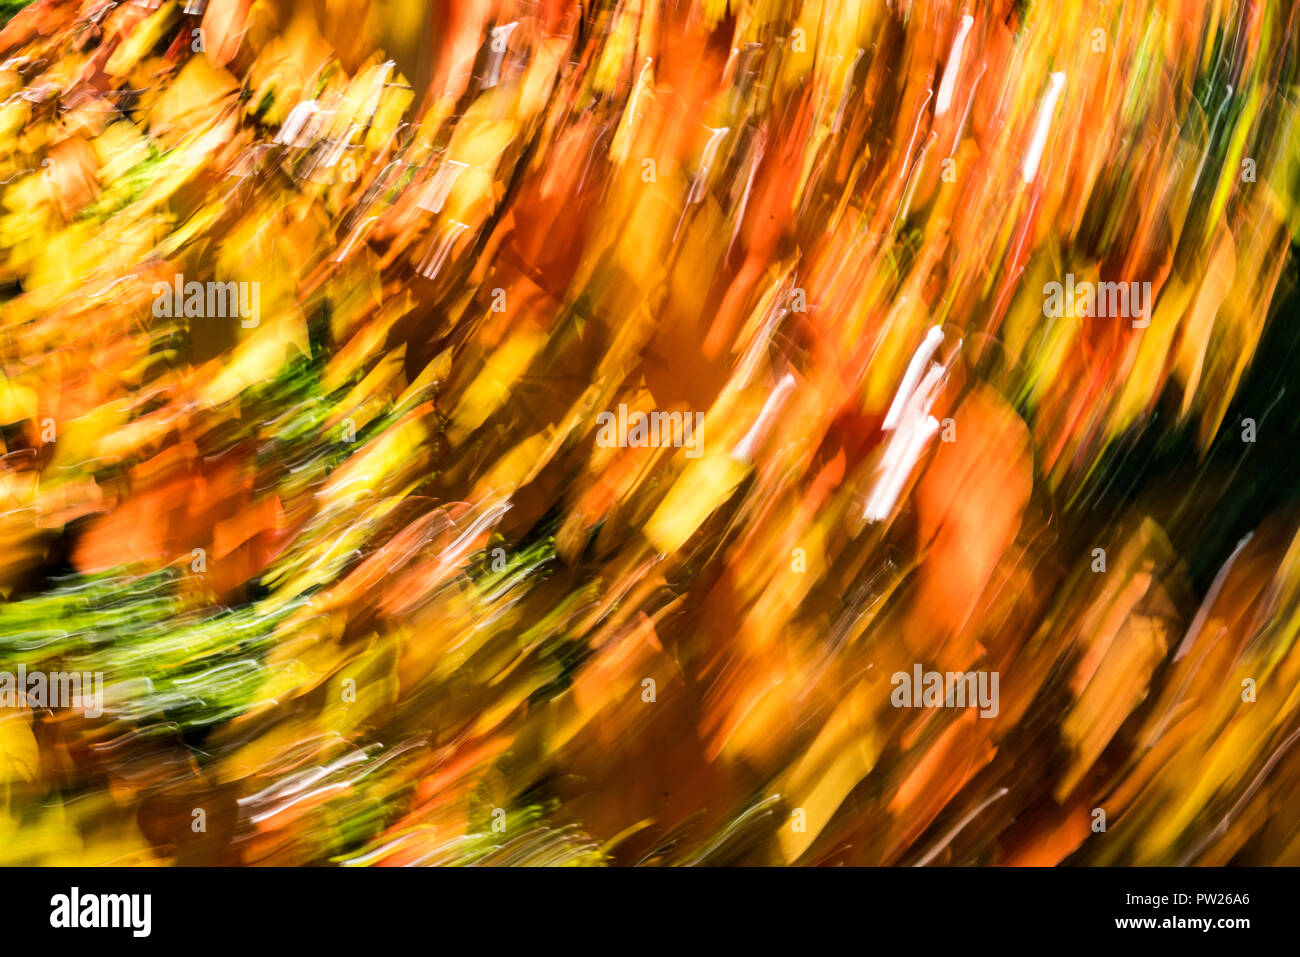 Abstract horizontal image of fall foliage in a swirl of brilliant color Stock Photo